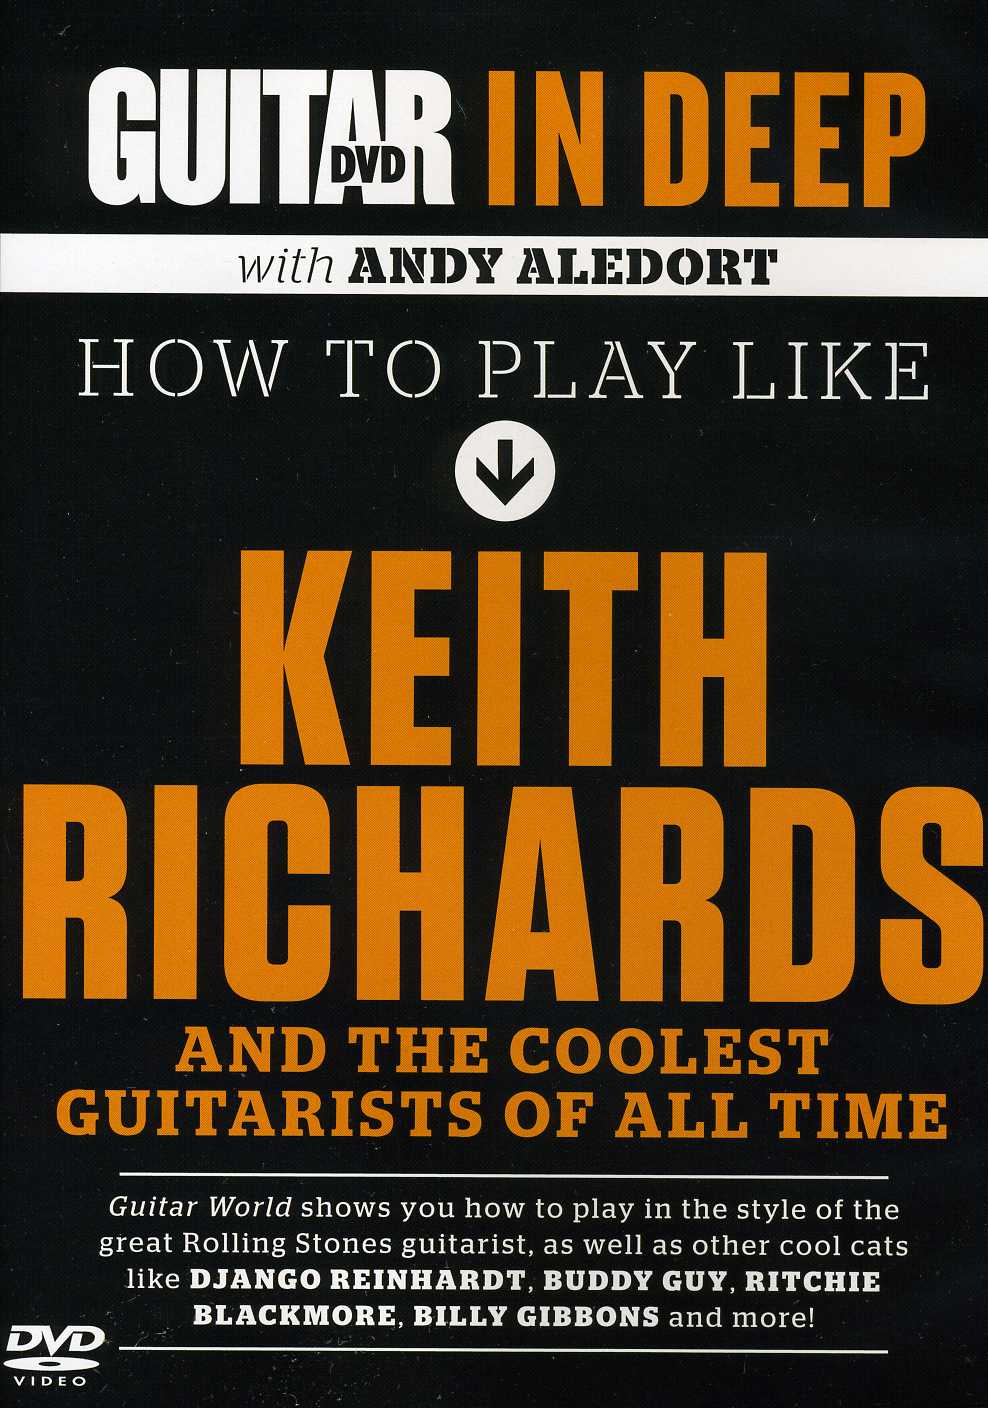 GUITAR WORLD: HOW TO PLAY STYLE OF KEITH RICHARDS